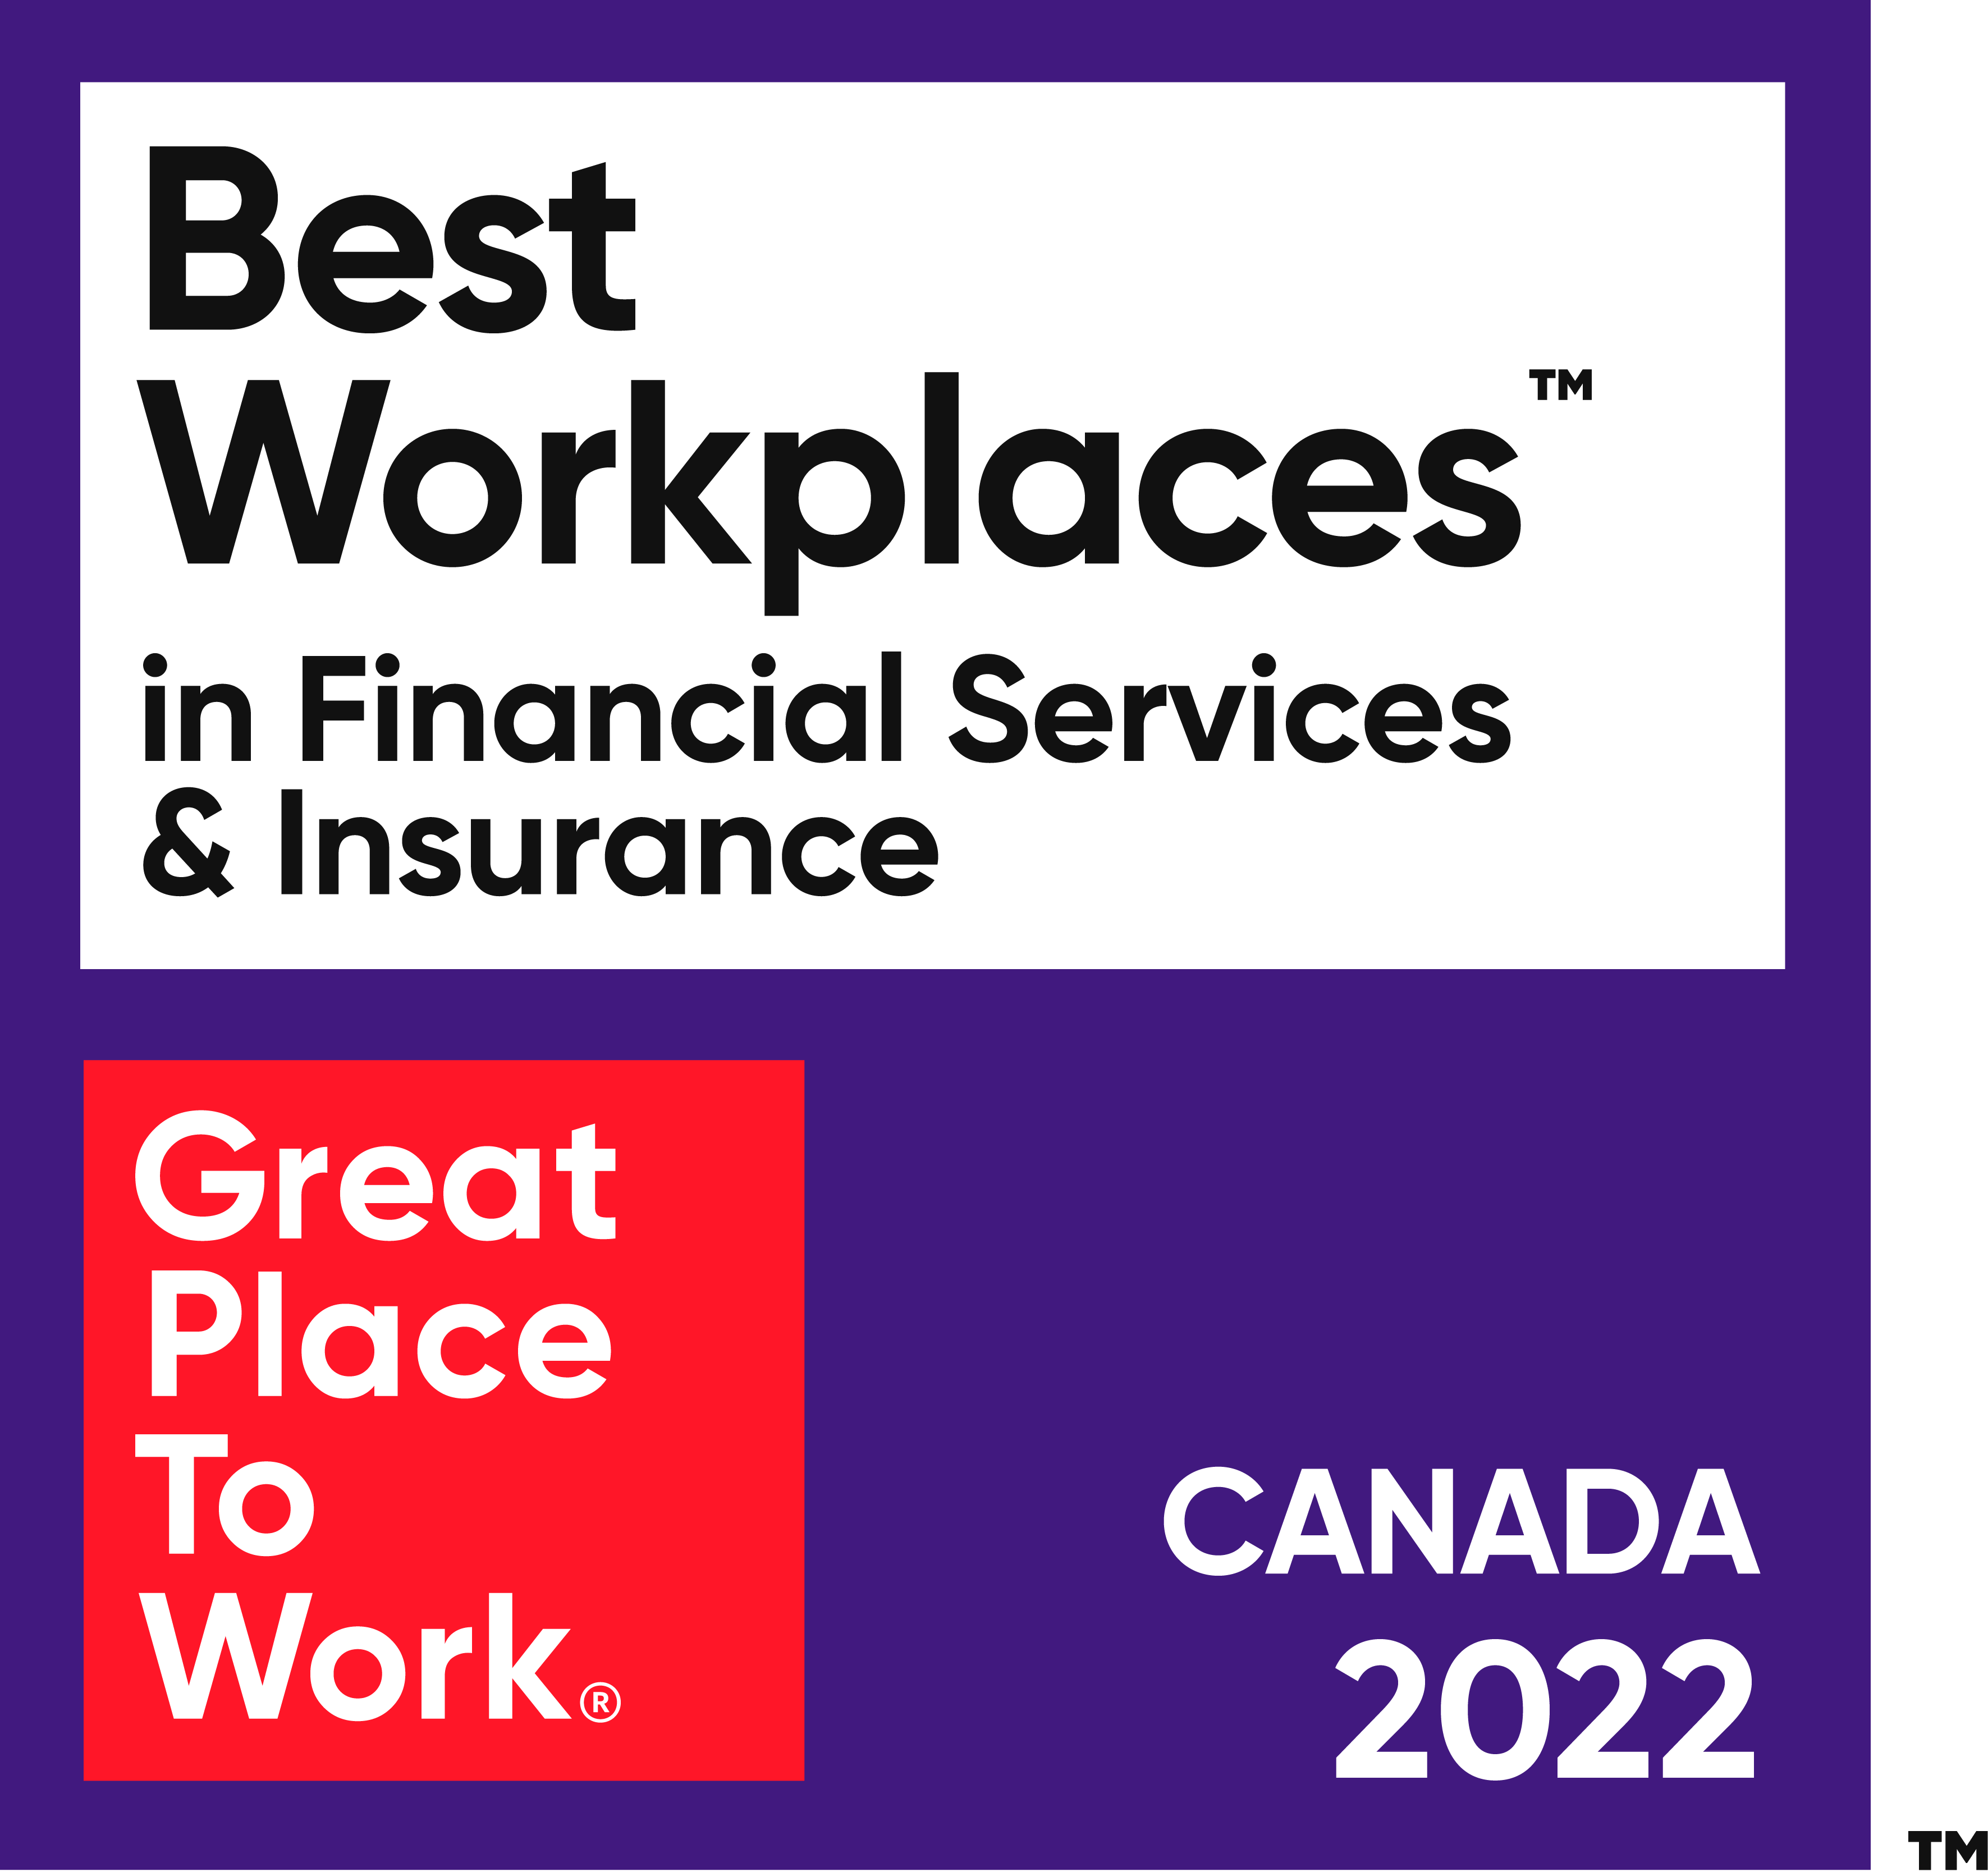 Great Place to work - Canada Best Workplaces in Financial Services